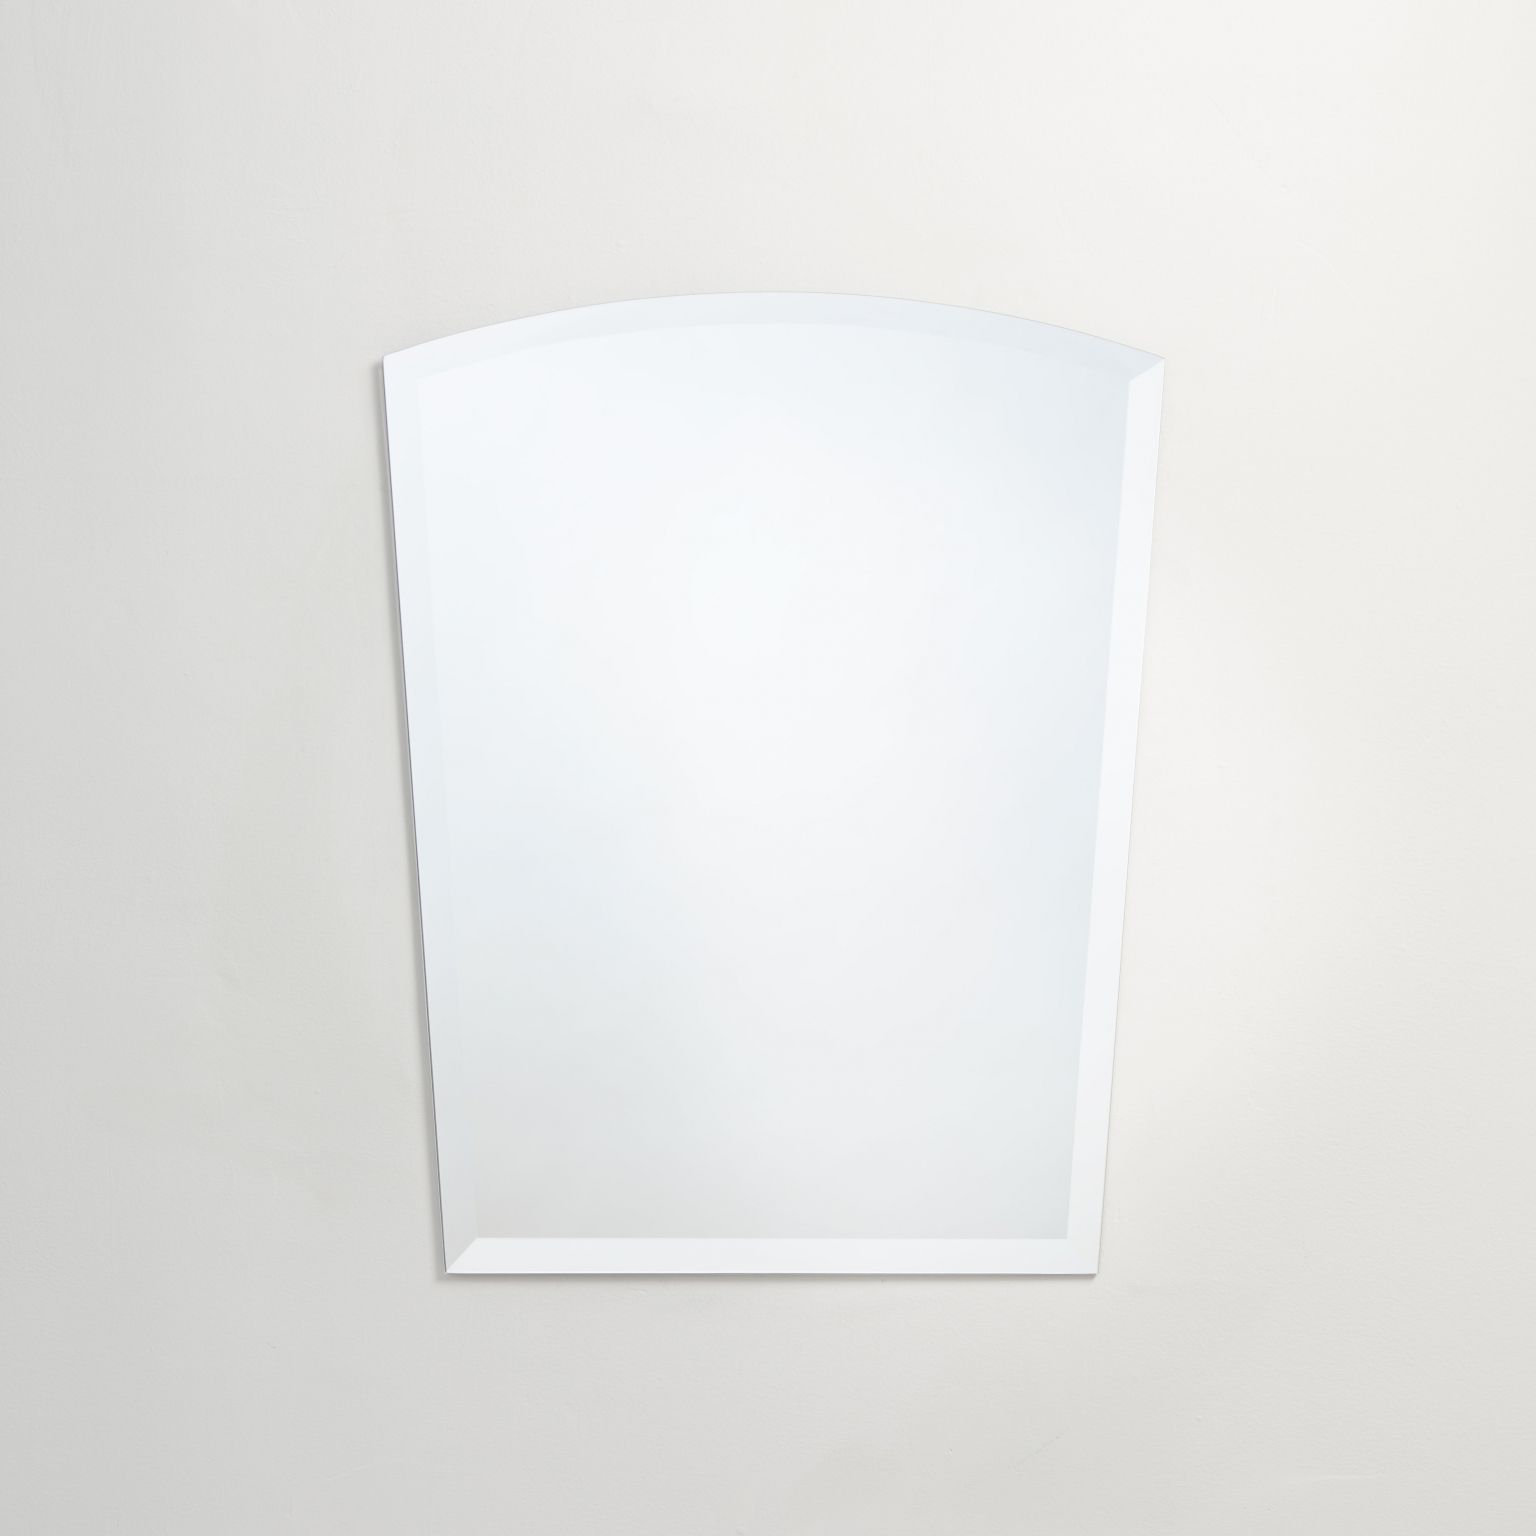 Crown Arch Frameless Beveled Wall Mirrors Within Well Liked Frameless Beveled Concave Arch Top Mirror – Better Bevel (View 14 of 15)